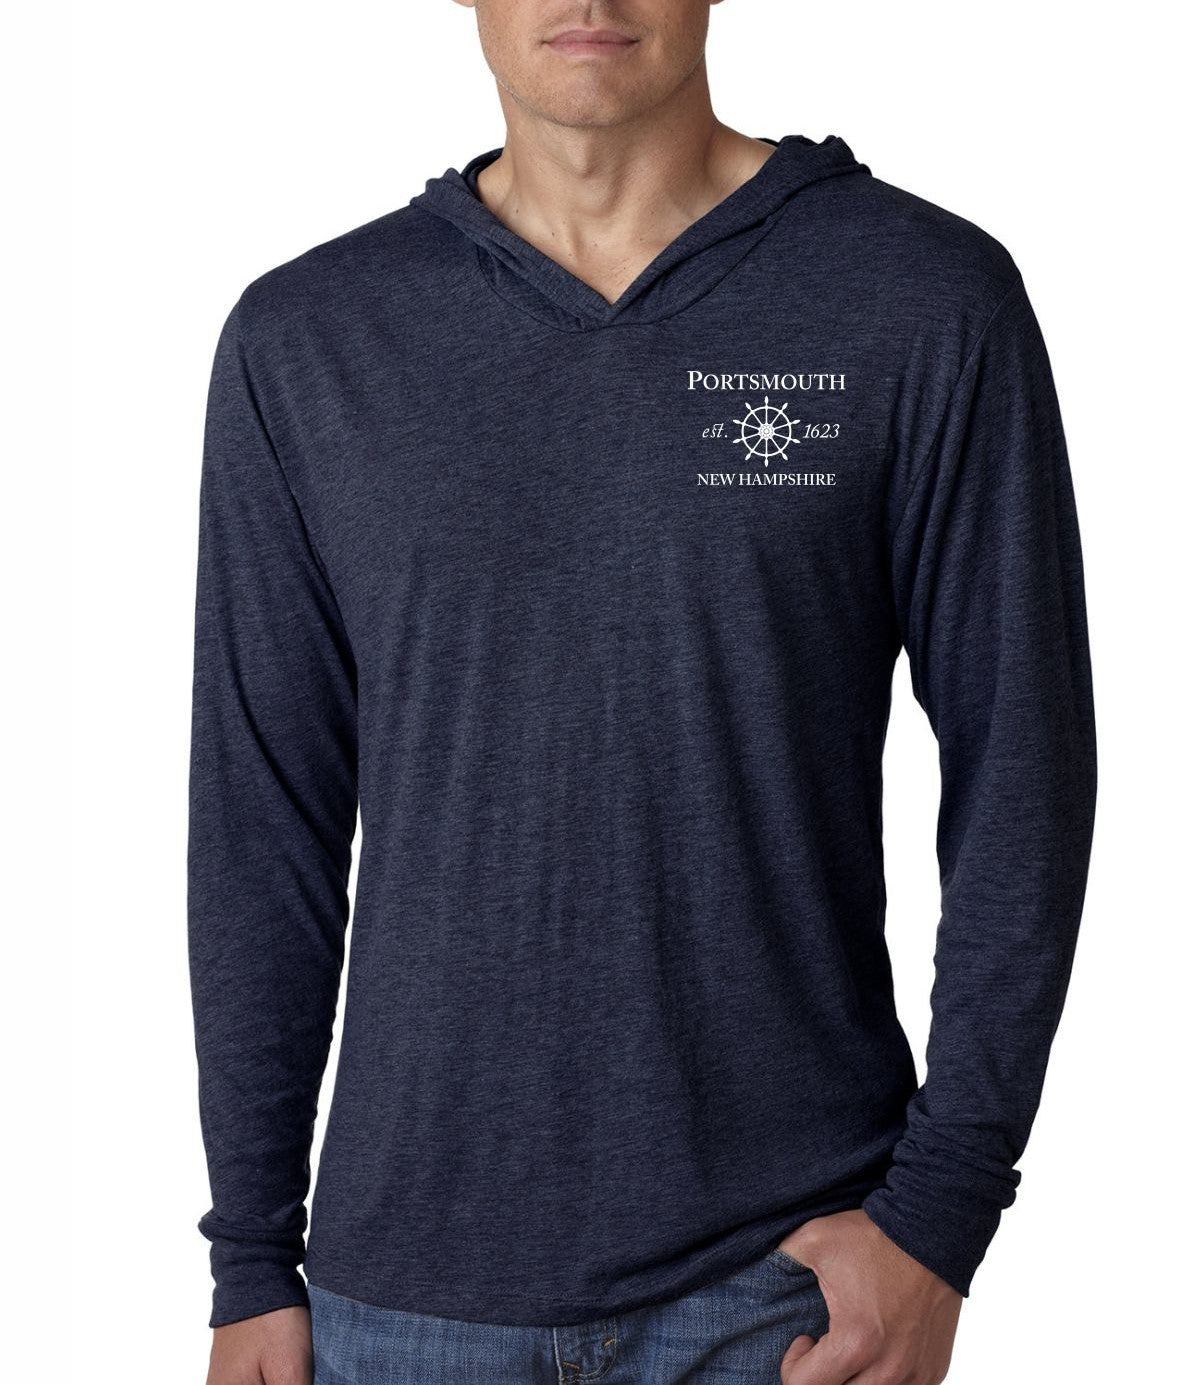 Portsmouth Long Sleeve Hooded T Shirt